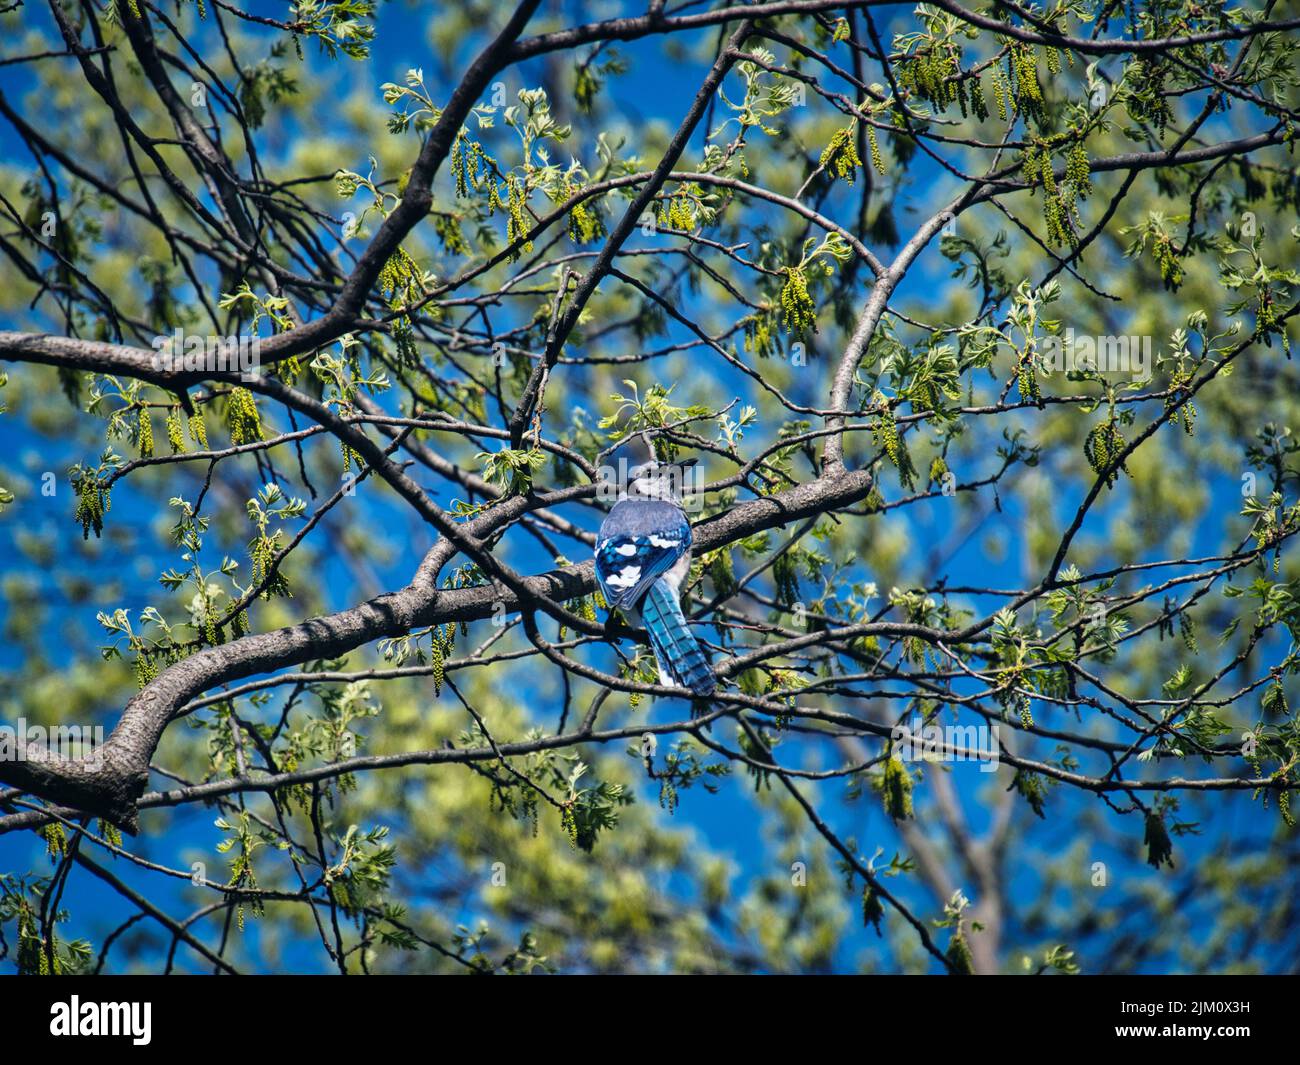 A view of a beautiful blue Jay on a tree in a forest Stock Photo